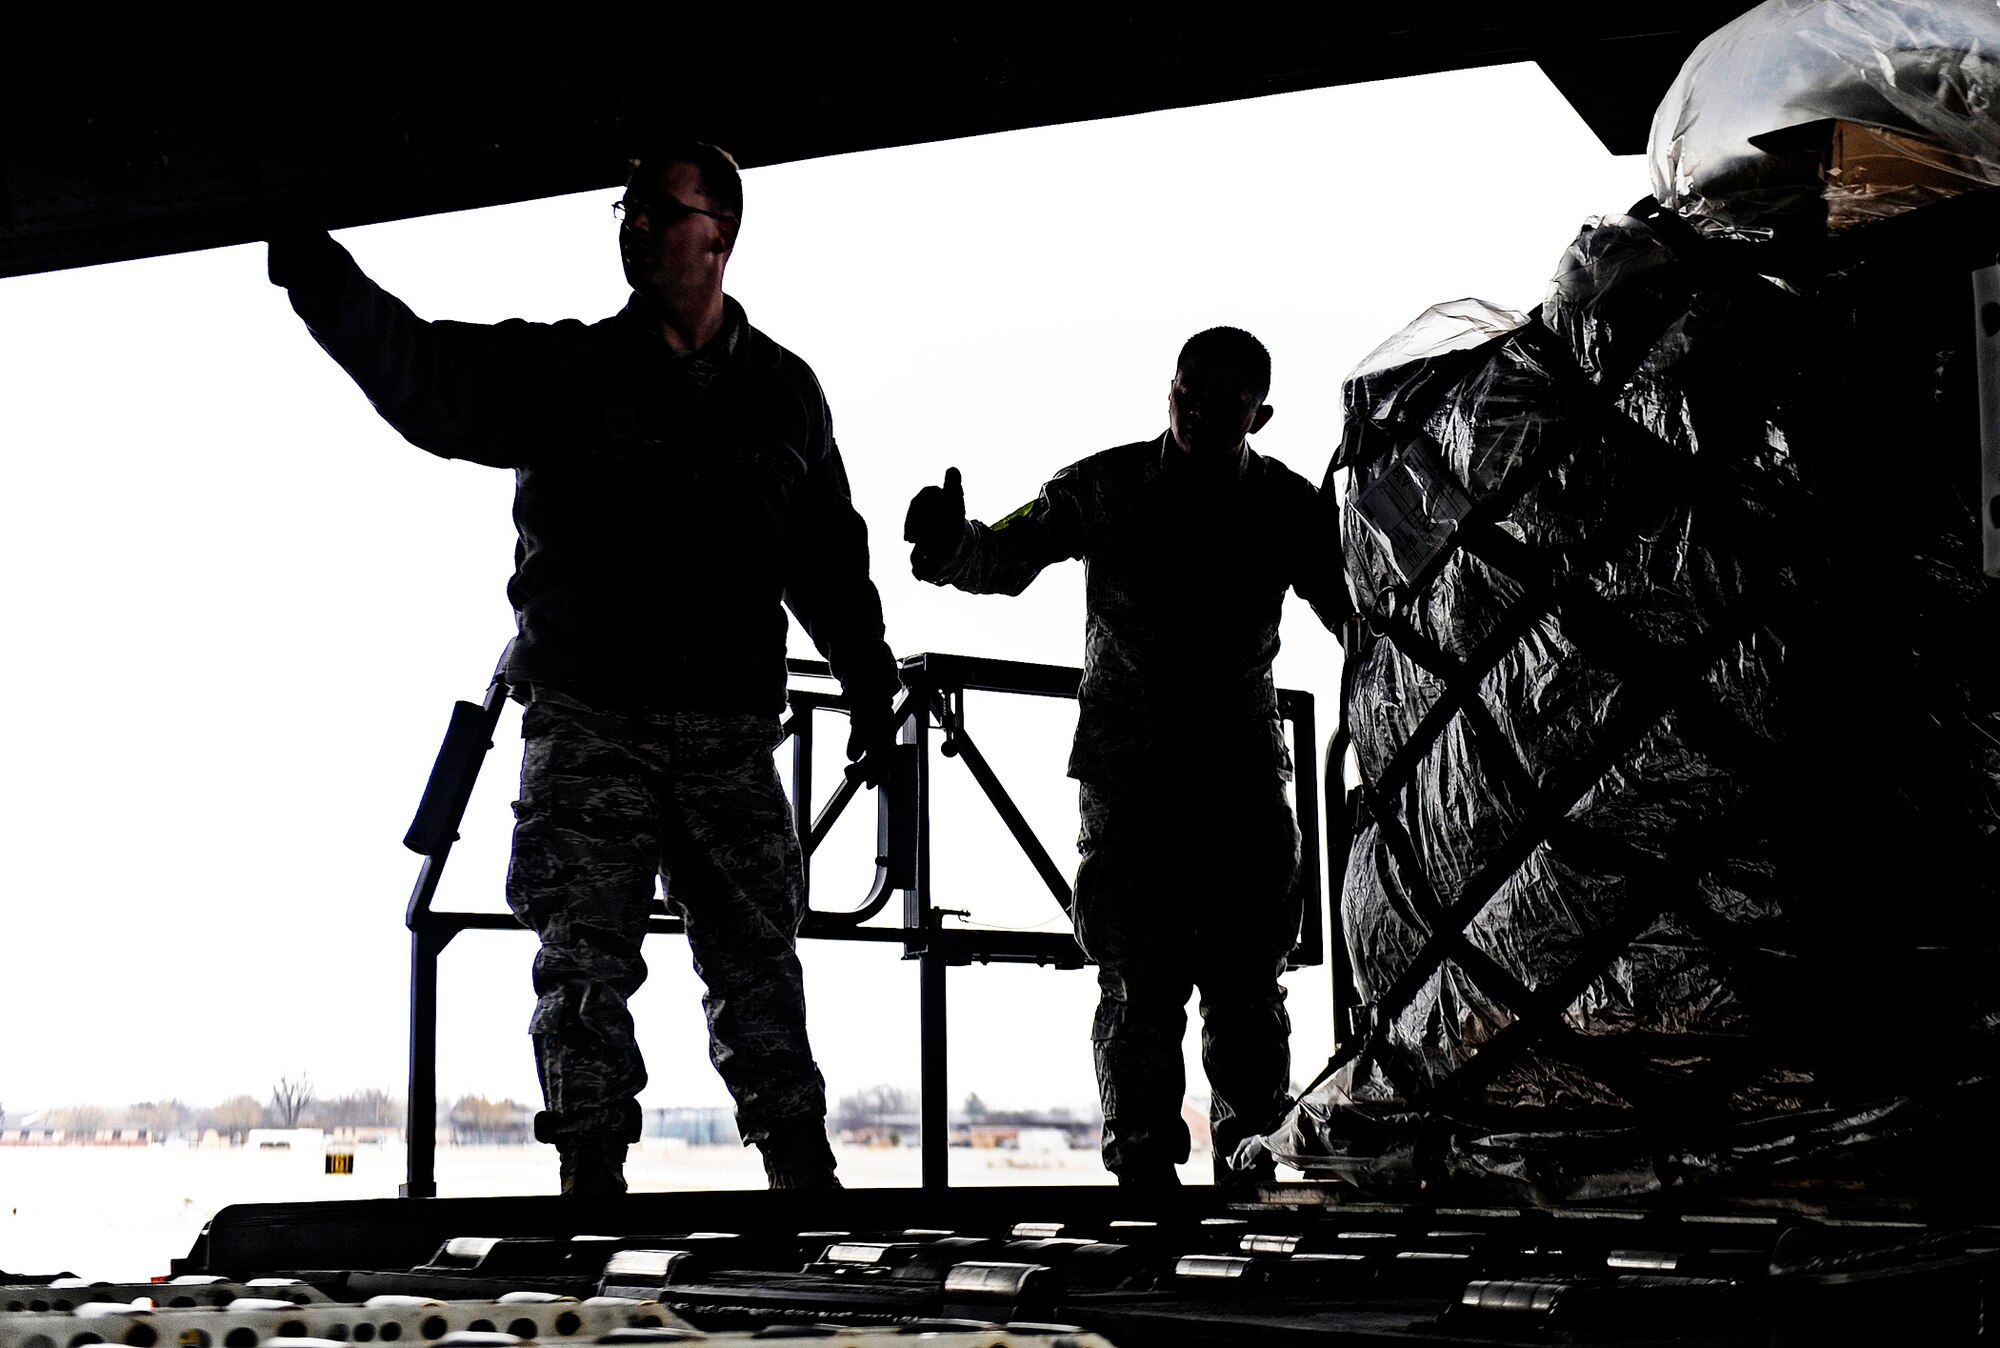 Airmen from the 375th Logistics Readiness Squadron give loadmasters the ‘all clear’ to move the final pallet onto a C-17 Globemaster III Feb. 7, 2011, at Scott Air Force Base, Ill. (U.S. Air Force photo/ Staff Sgt. Ryan Crane)